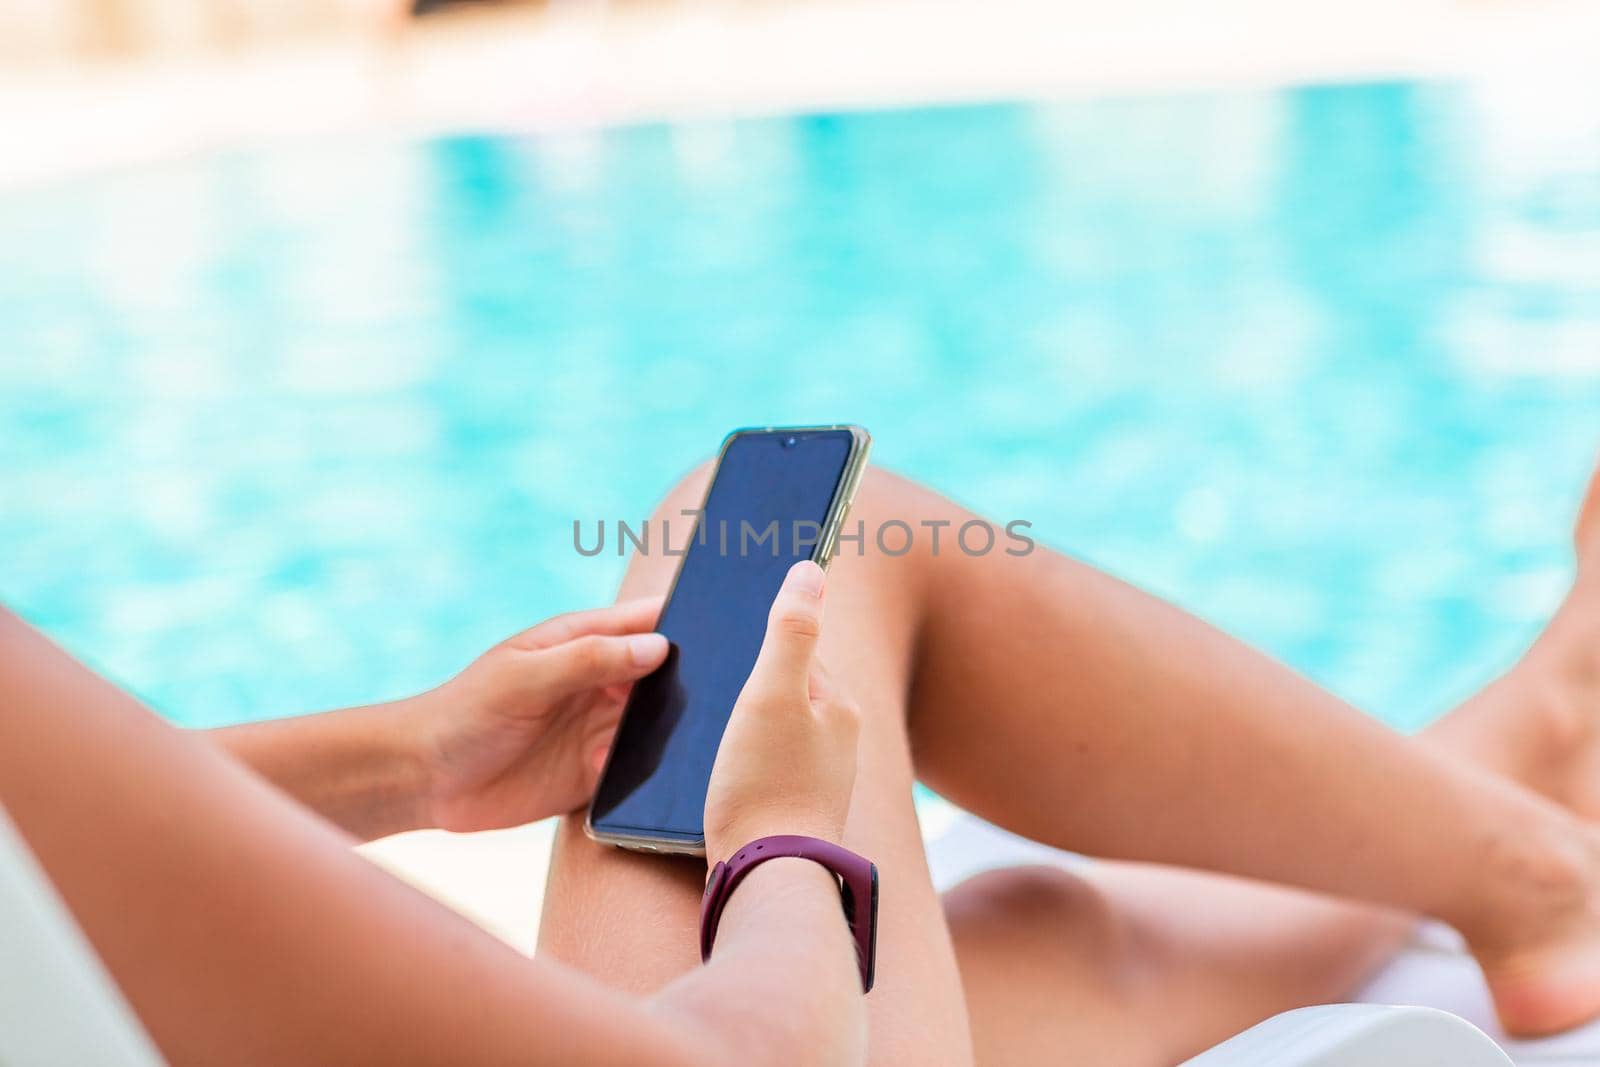 Close up of teenage girl's hands playing games and searching web on the telephone at the pool on vacation. Gadget dependency disorder problem for kids during holiday vacation at the seaside concept